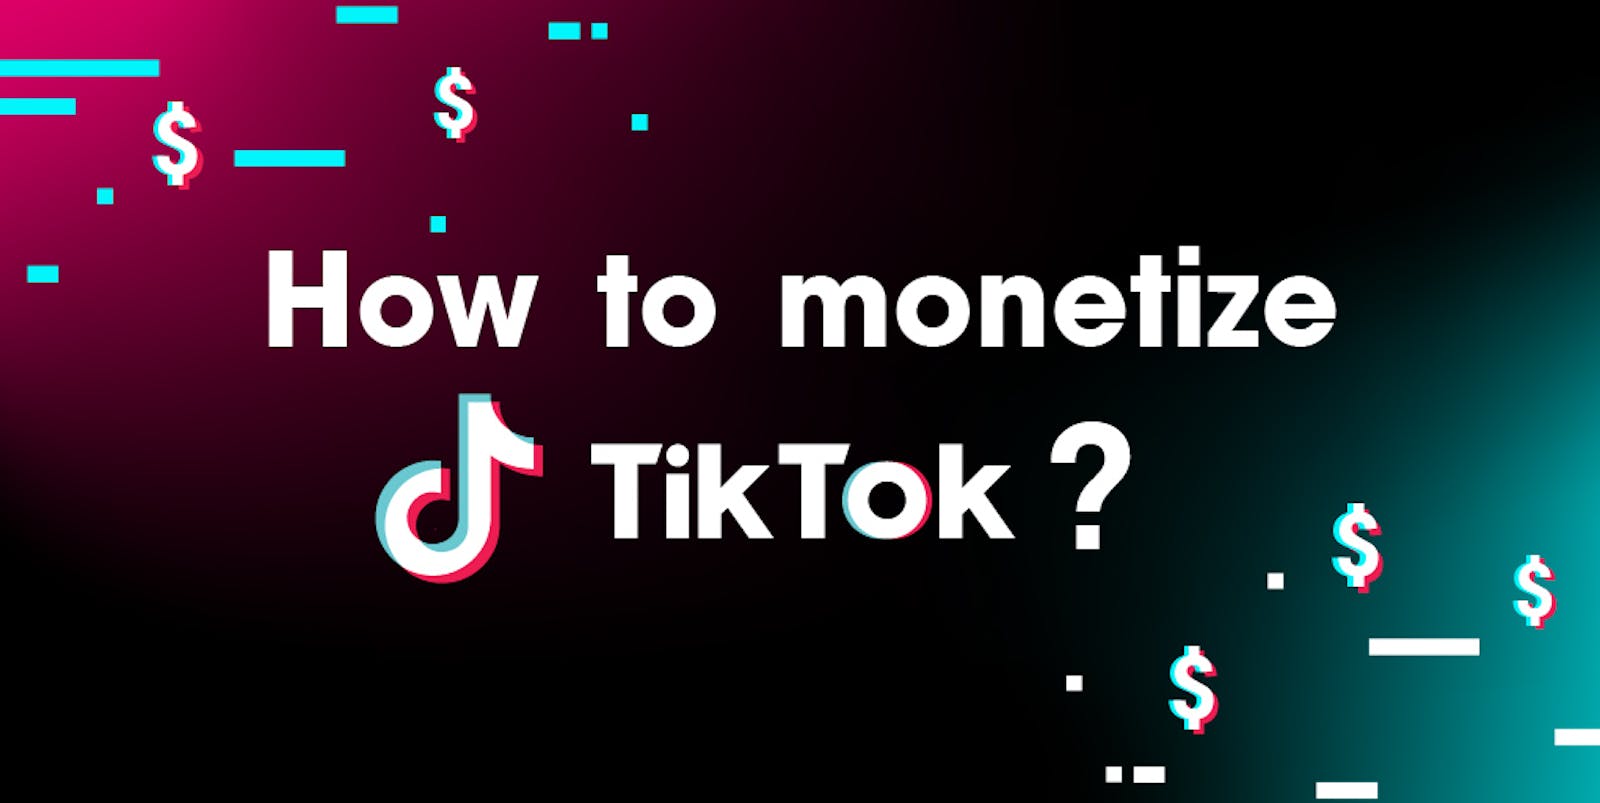 Everyone is using this creator network to monetize their TikTok